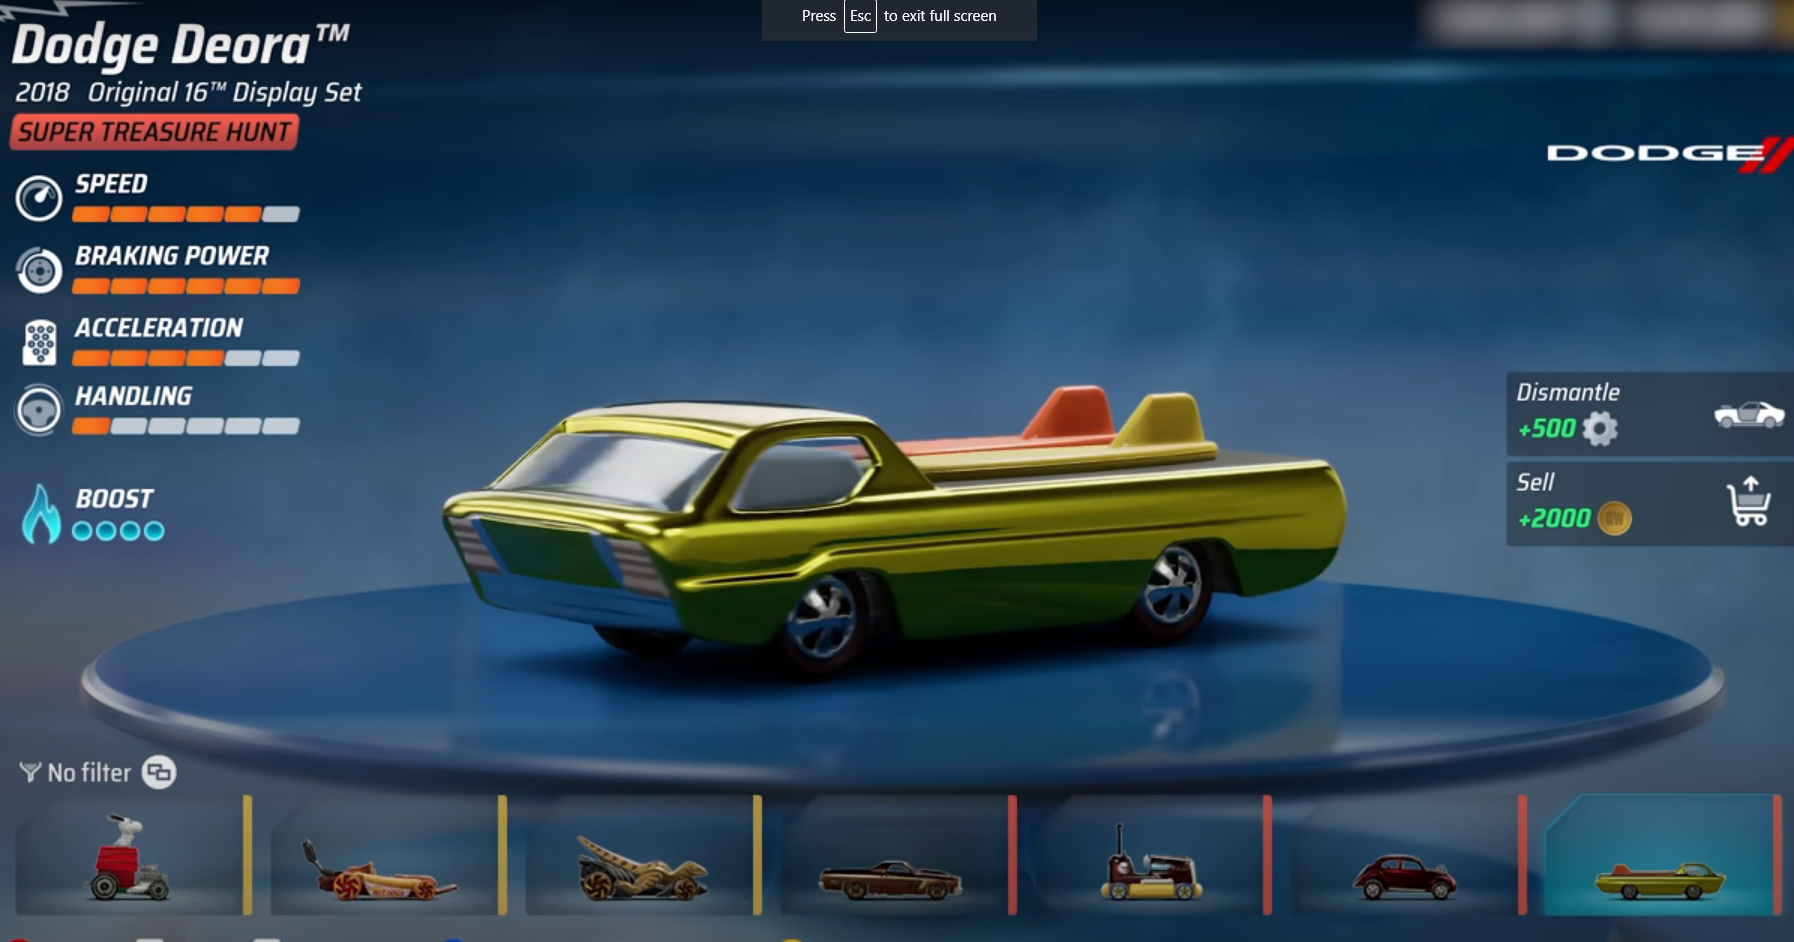 HOT WHEELS UNLEASHED™ How to Unlock Dodge Deora Tips - Unlocking and Obtaining Deora - 66B6B08